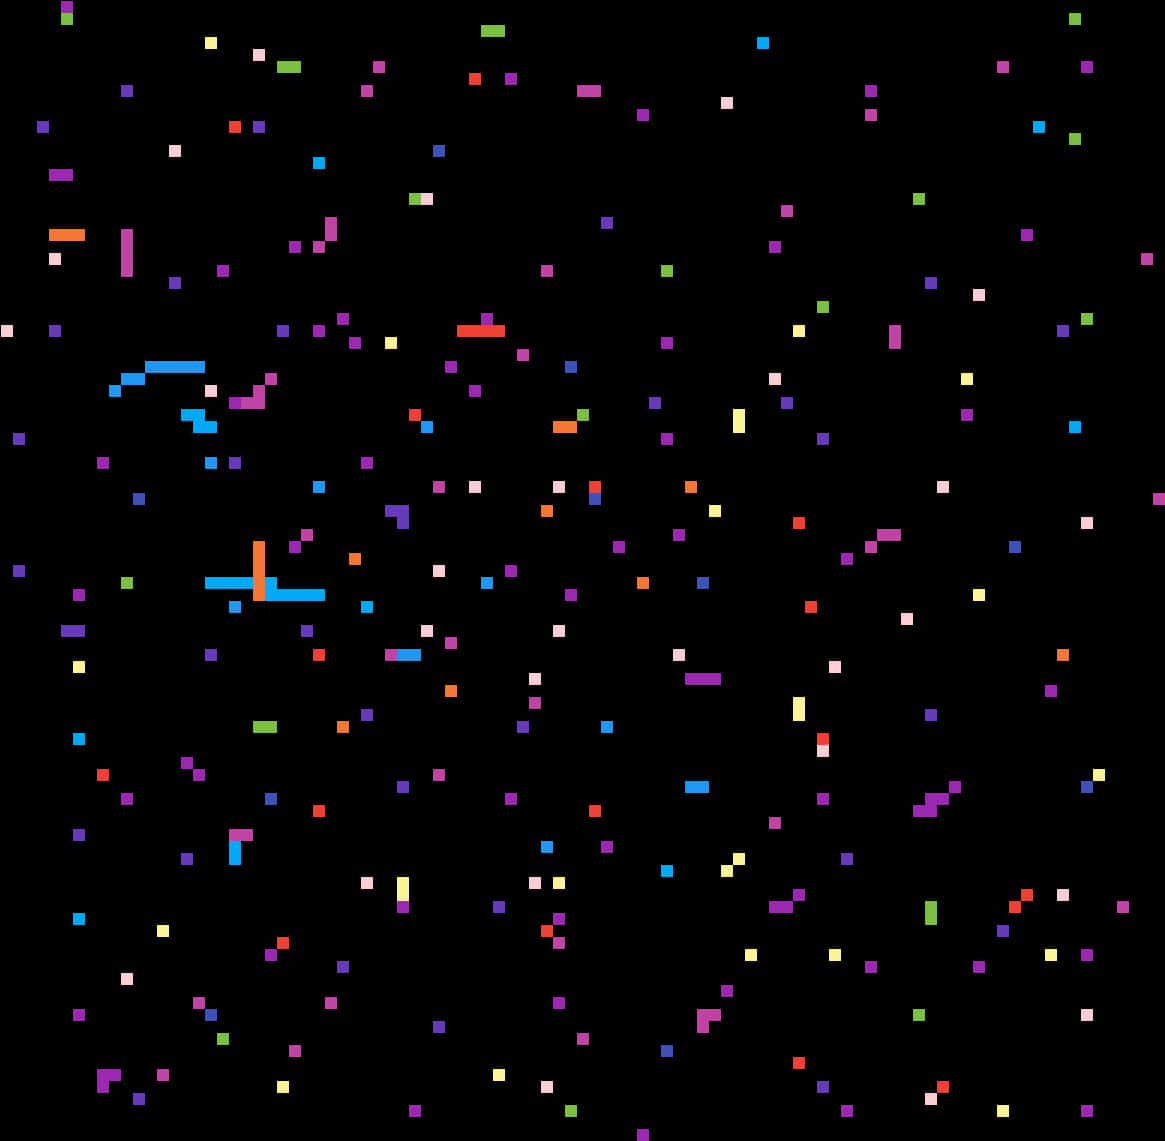 A Pixelated Image Of Colorful Confetti